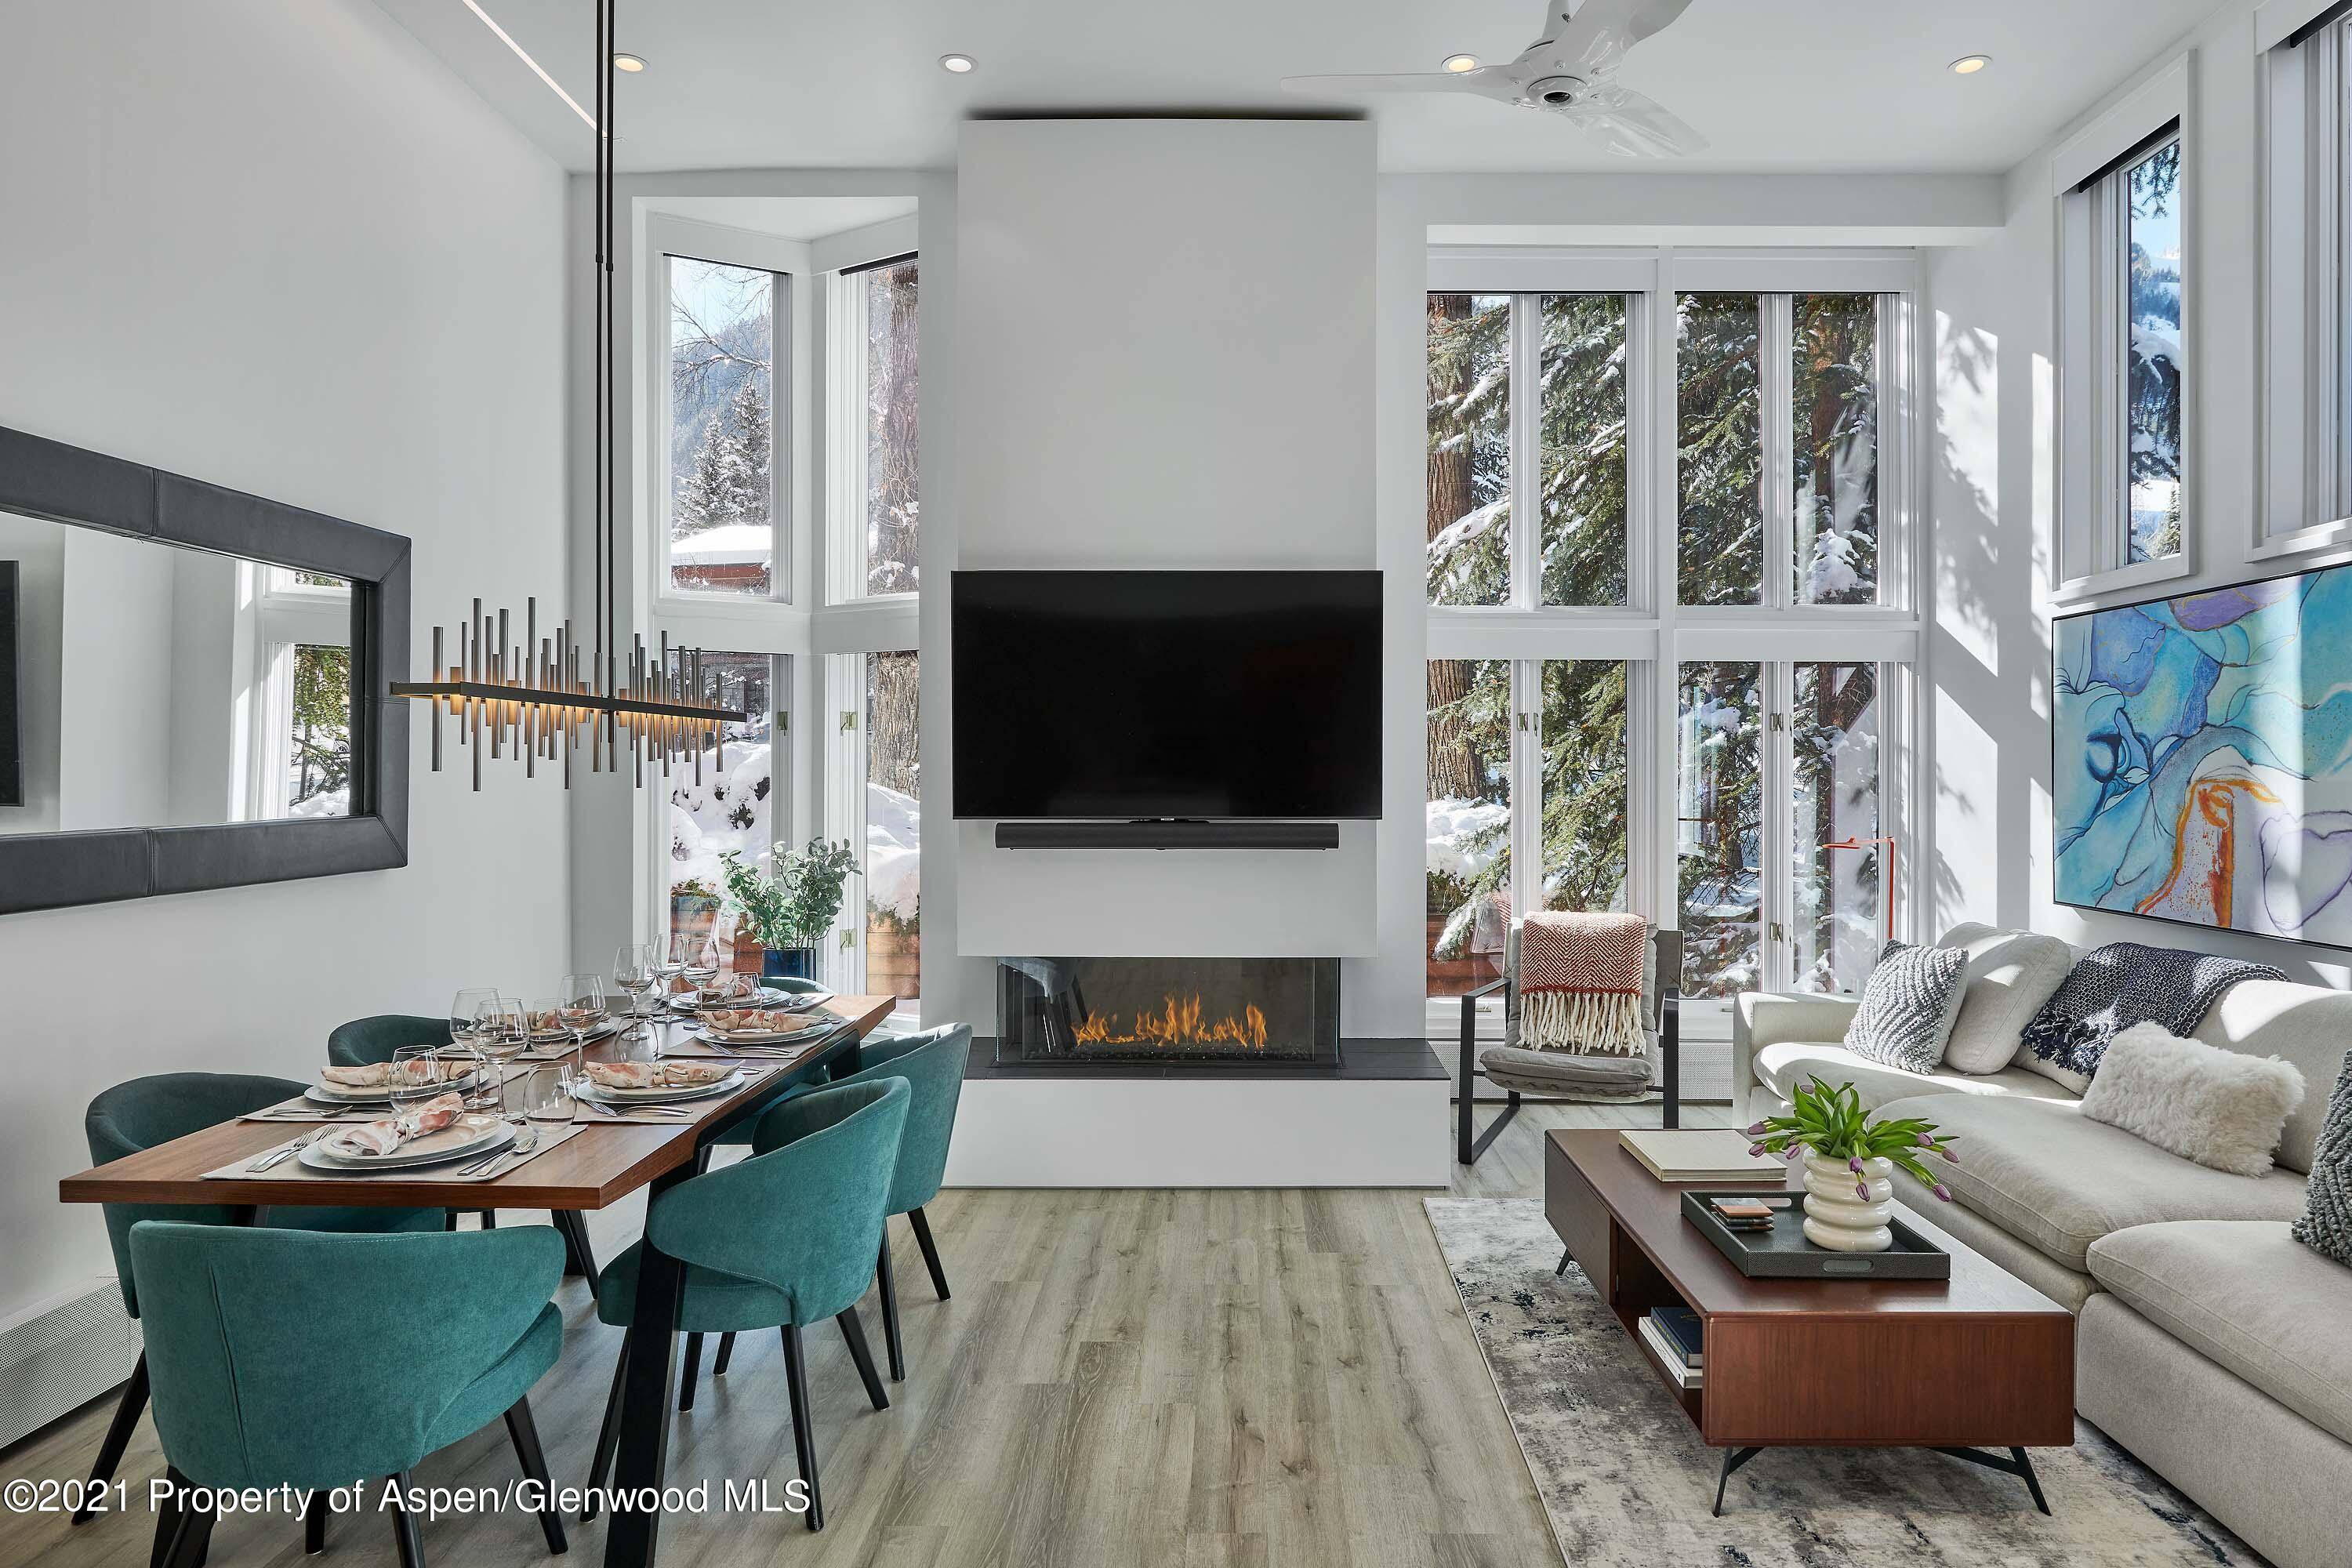 Newly remodeled and thoughtfully designed by Kim Raymond Architecture Interiors, this stunning contemporary condominium features high ceilings in the living room, a three sided gas fireplace, with all new furnishings, ...